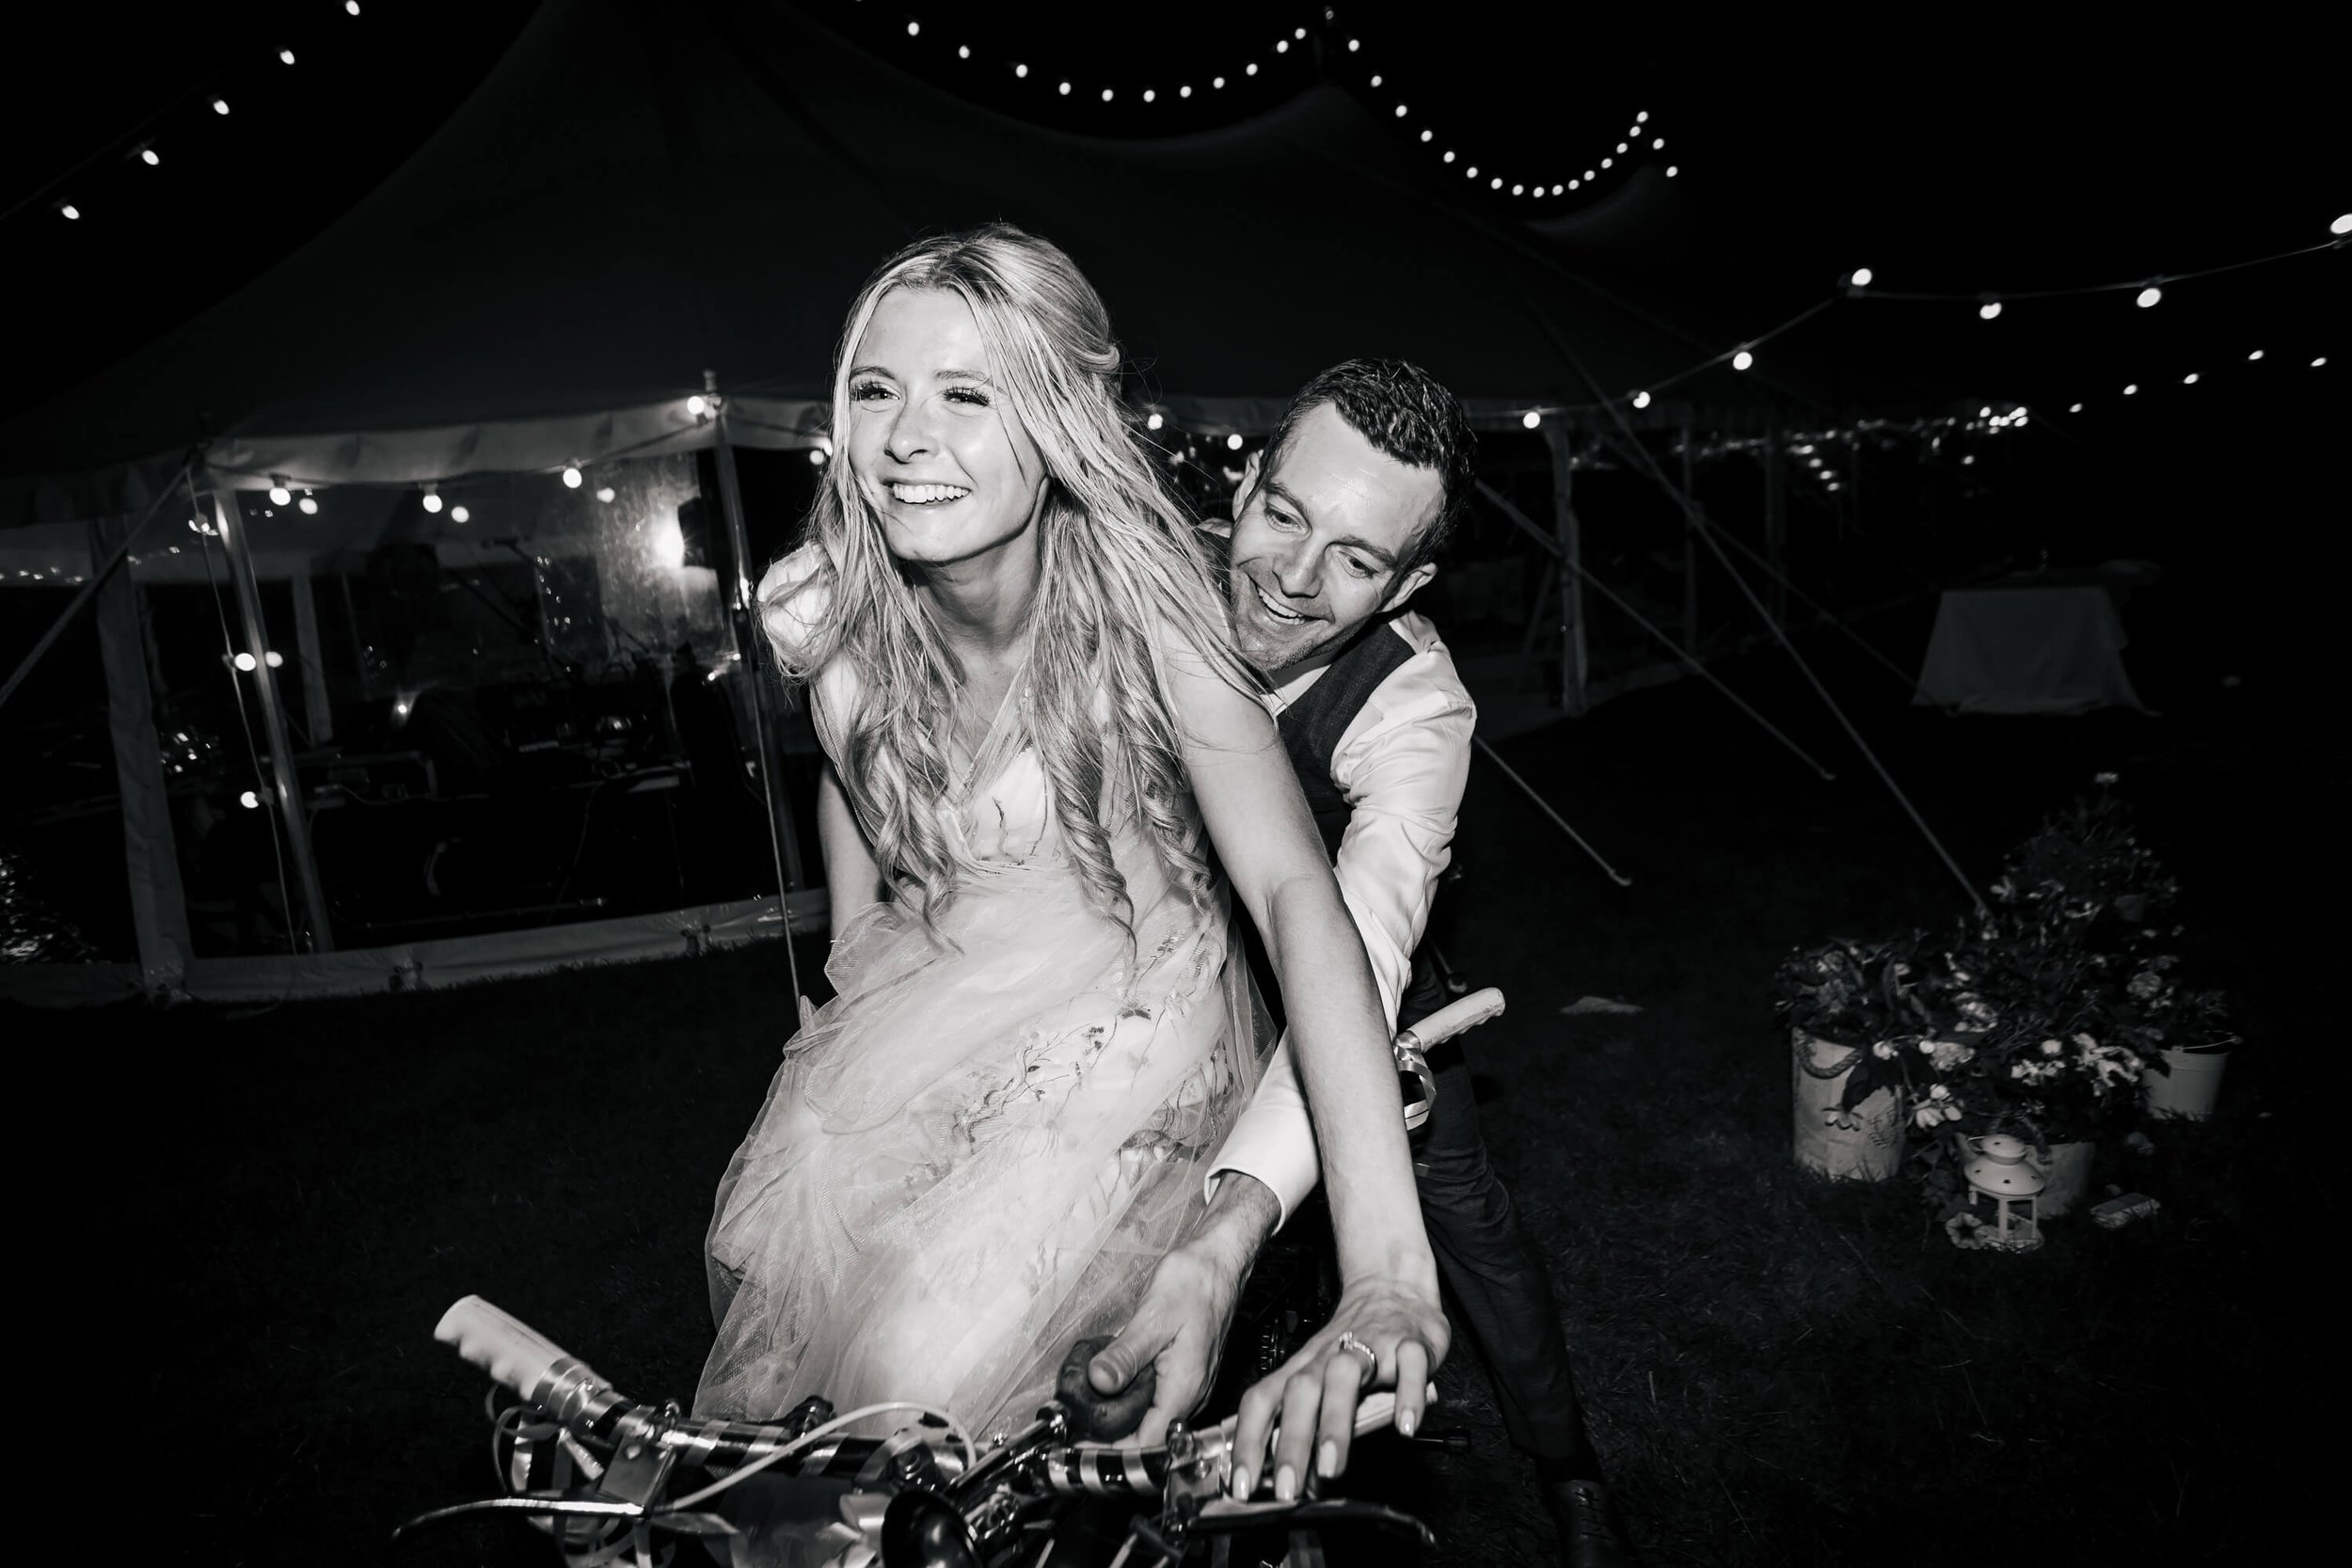 Bride and groom on a tandem at their wedding